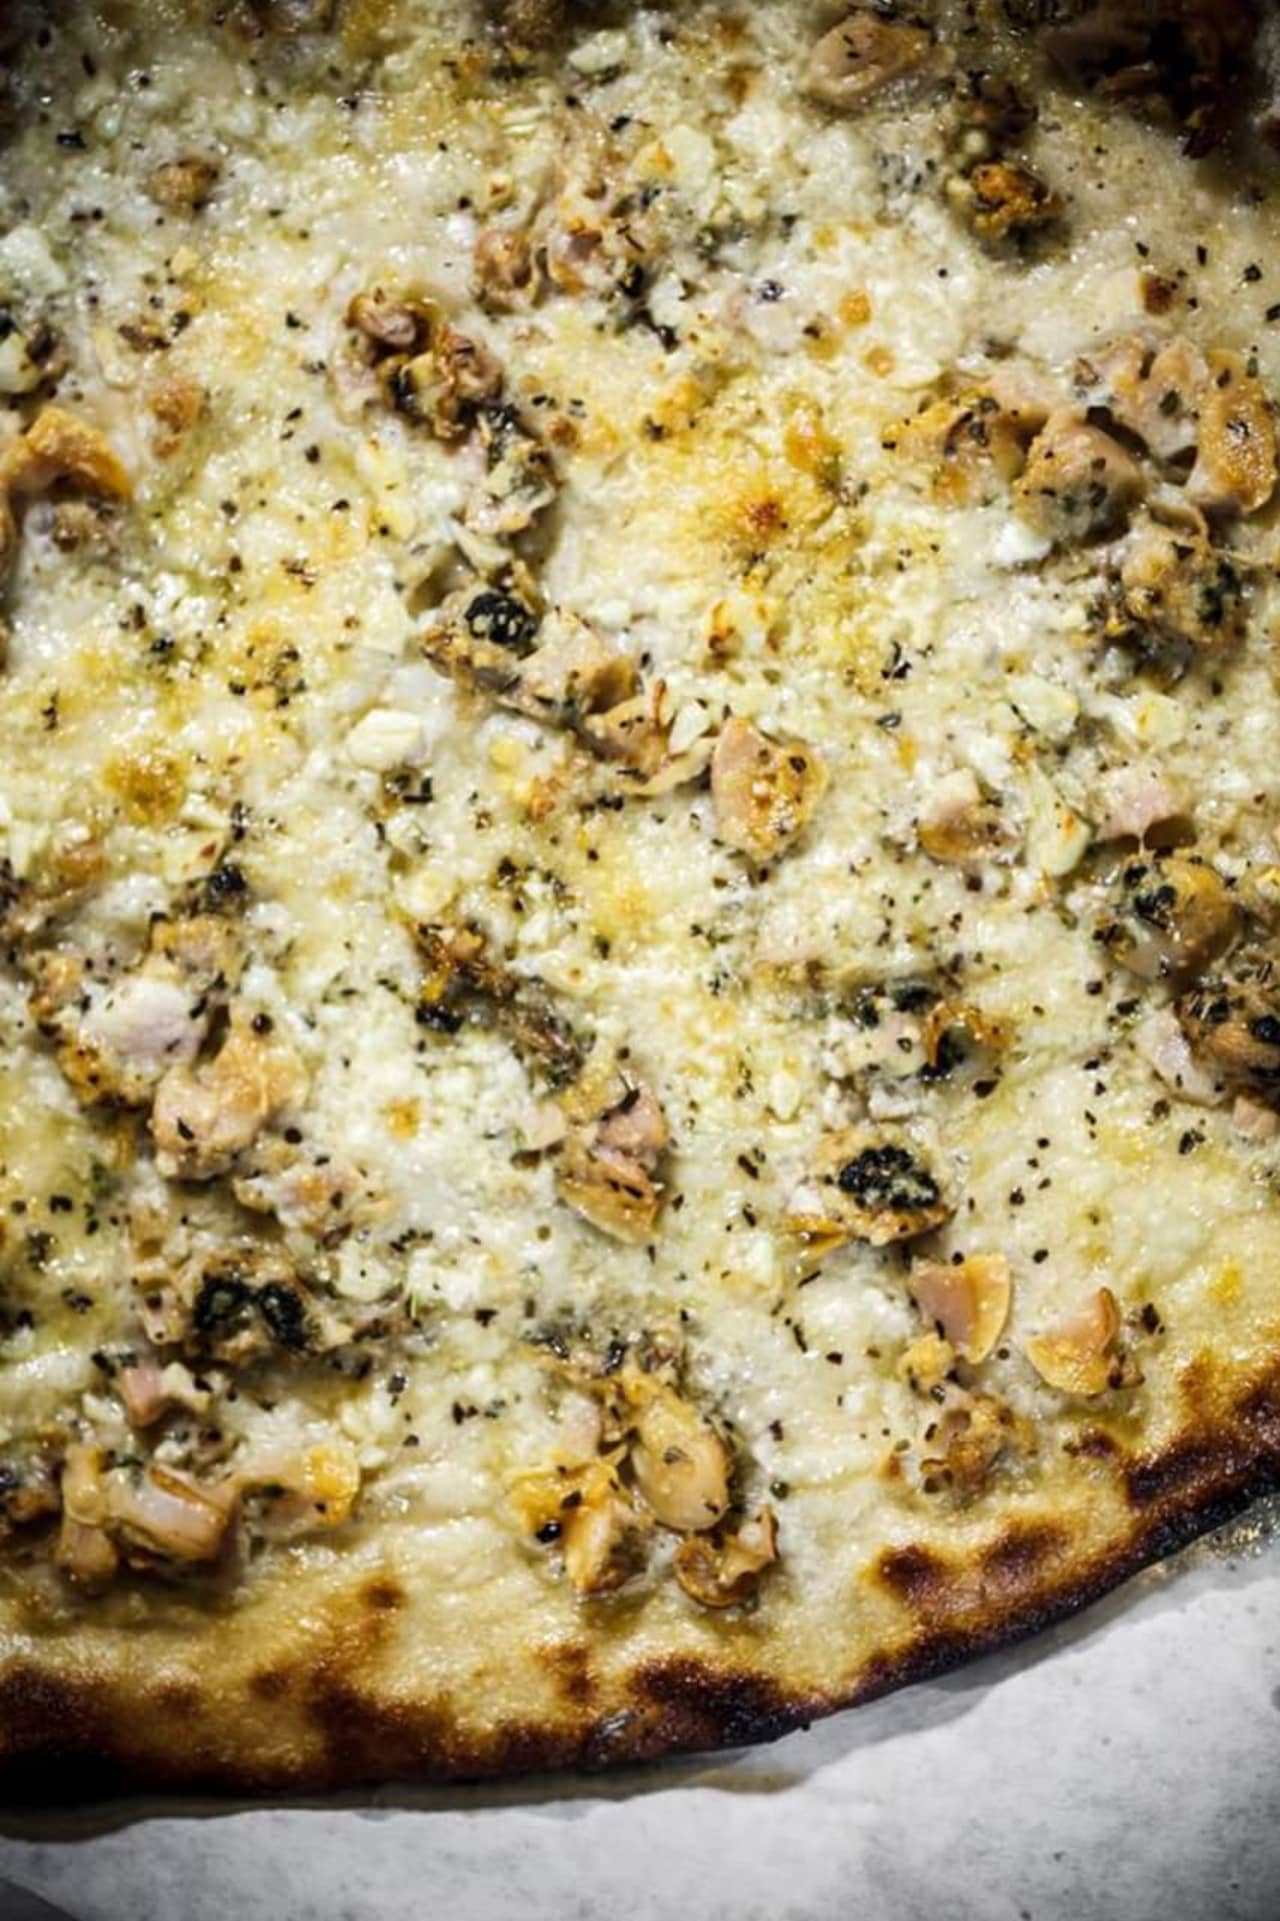 Daily Meal suggests the white clam pie from Frank Pepe's.